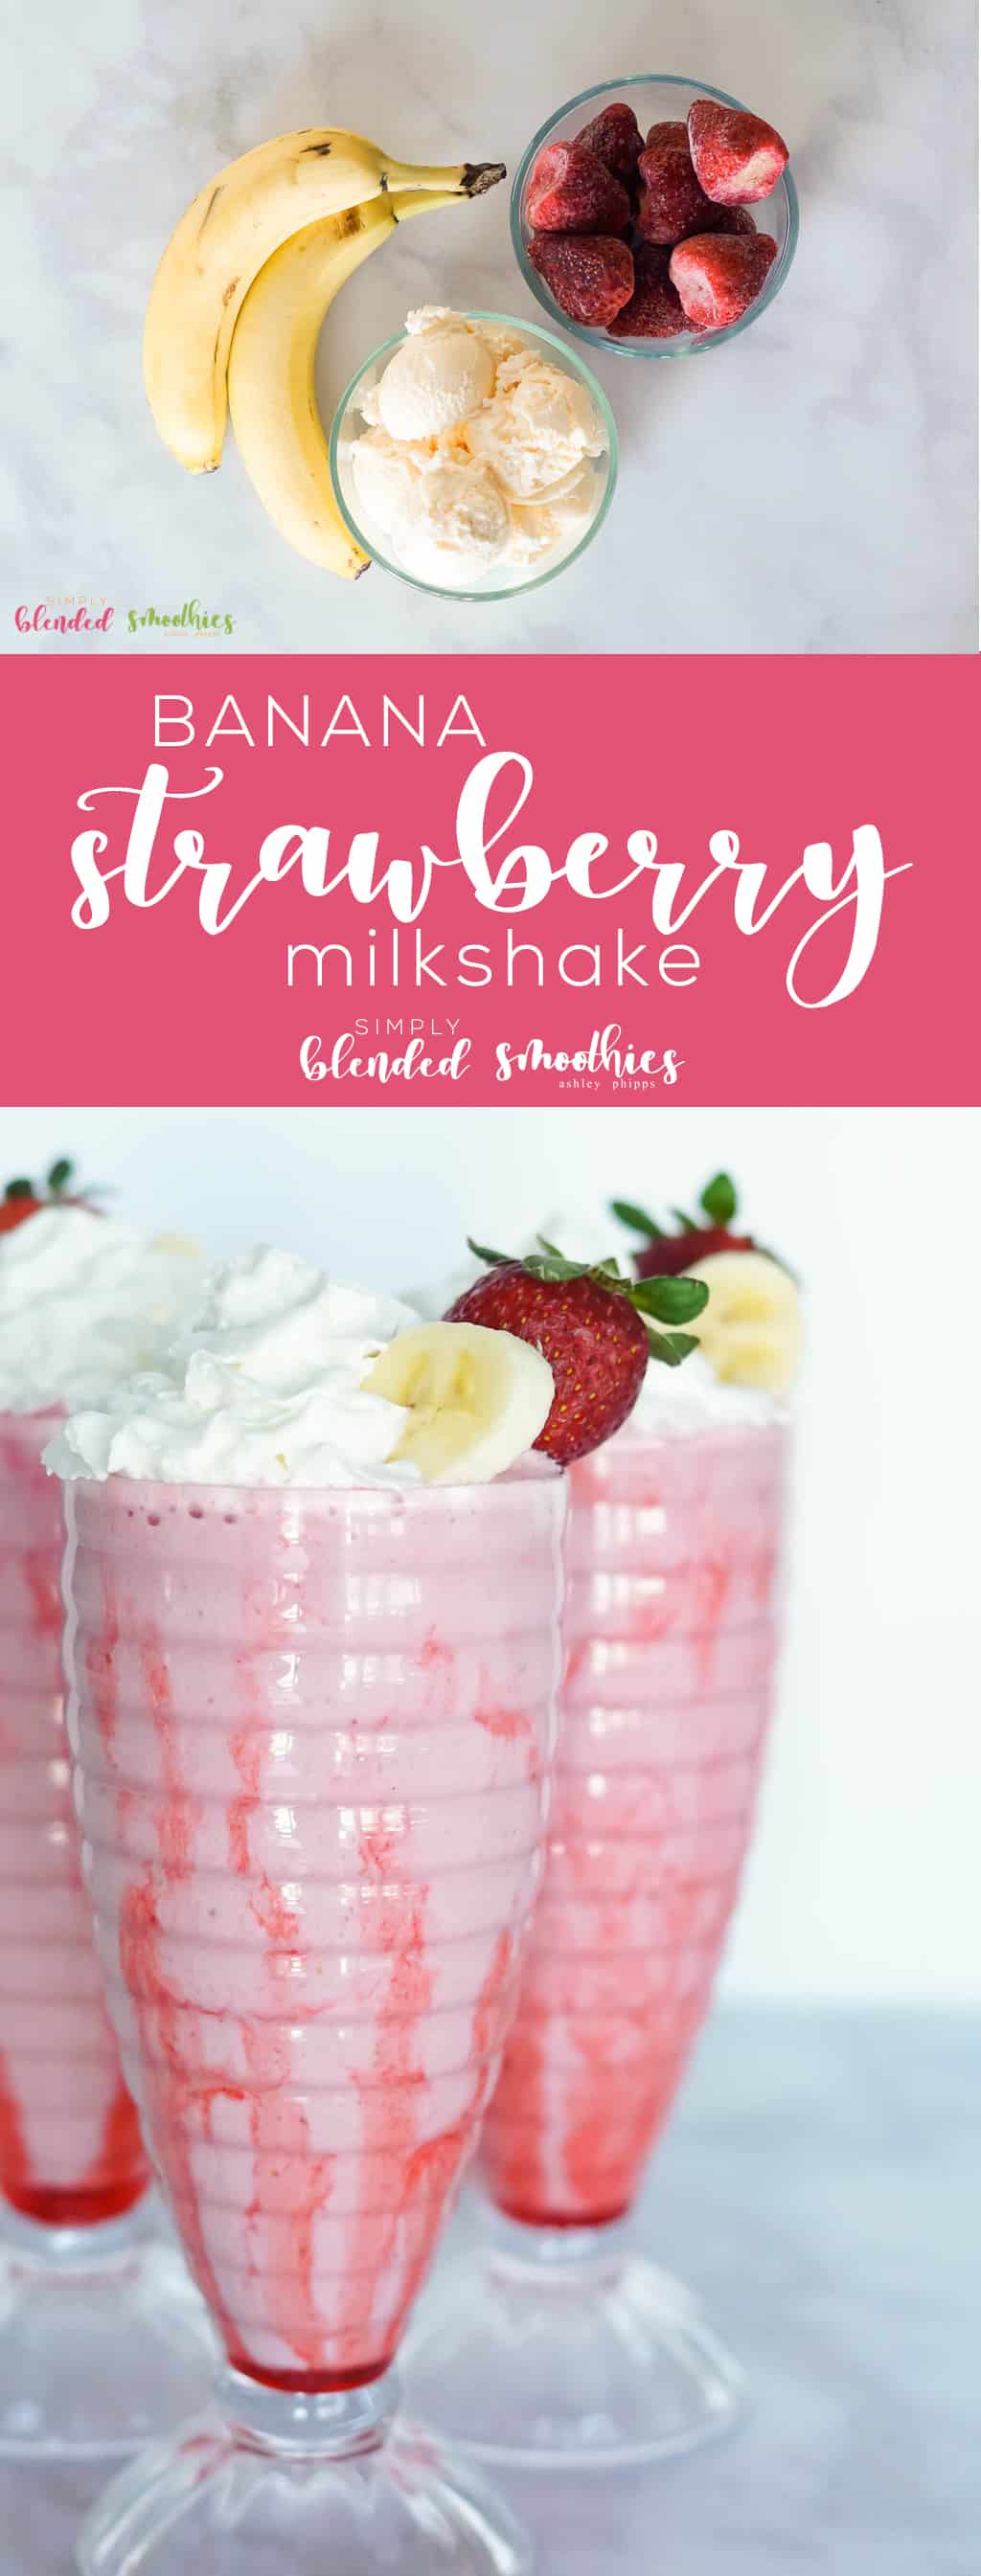 Strawberry Banana Milkshake - This Delicious And Simple To Make Milkshake Is A Delicious Treat The Whole Family Will Enjoy